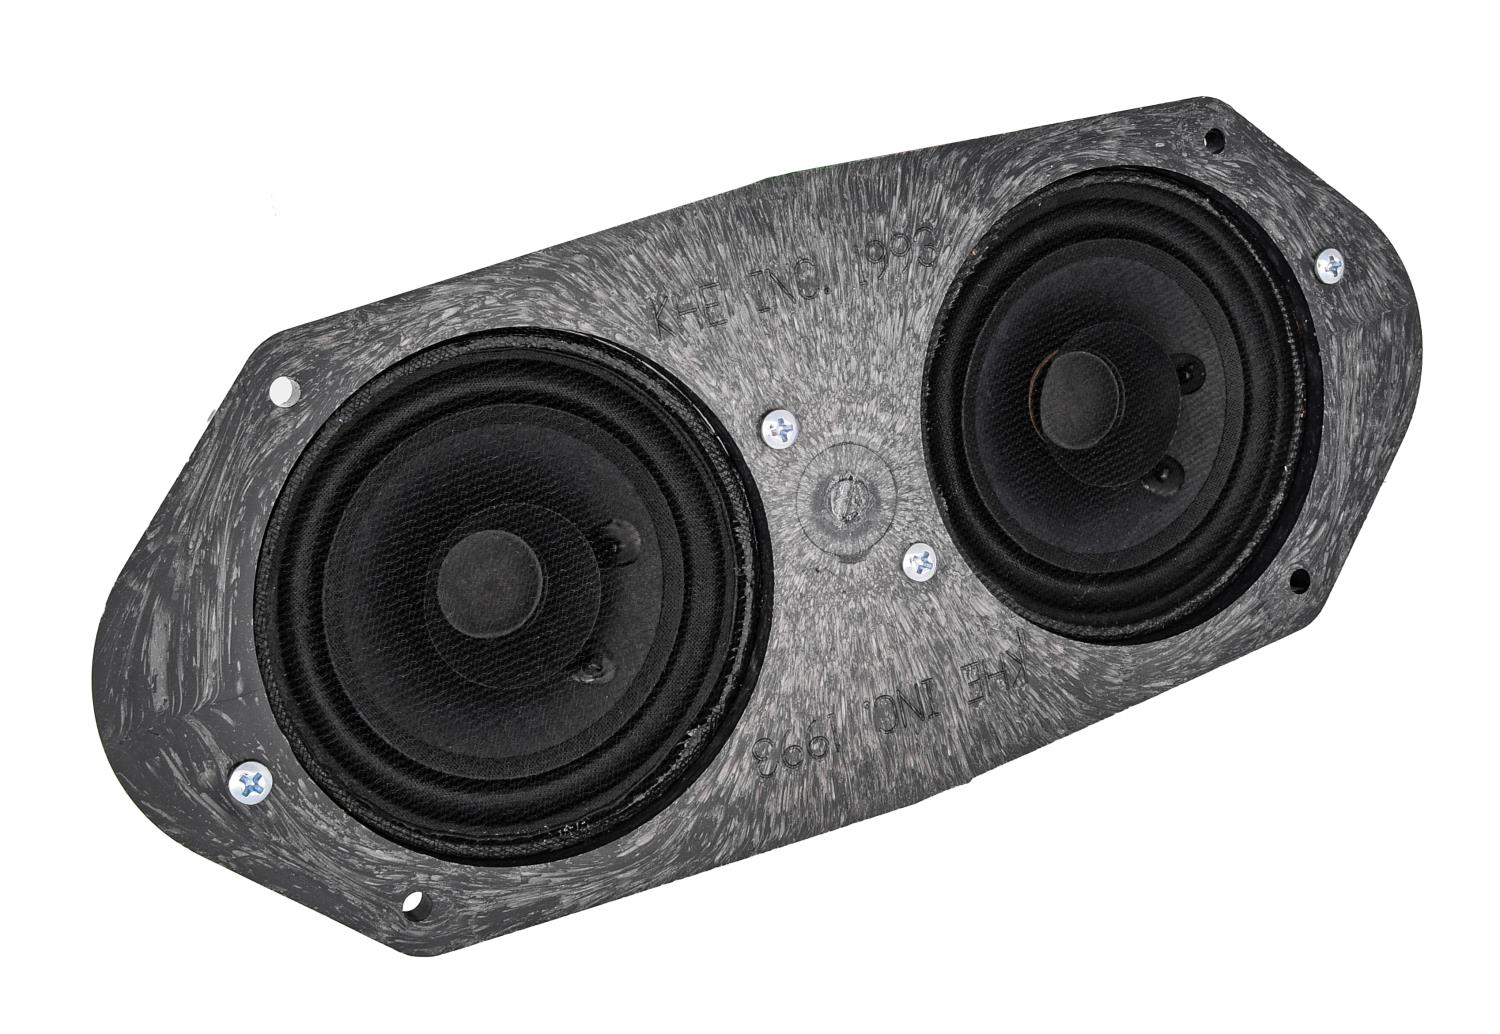 Dual Dash Speakers Fits Select 1973-1986 Chevrolet and GMC C/K Series Truck, Suburban, Blazer, Jimmy [Without Stereo]